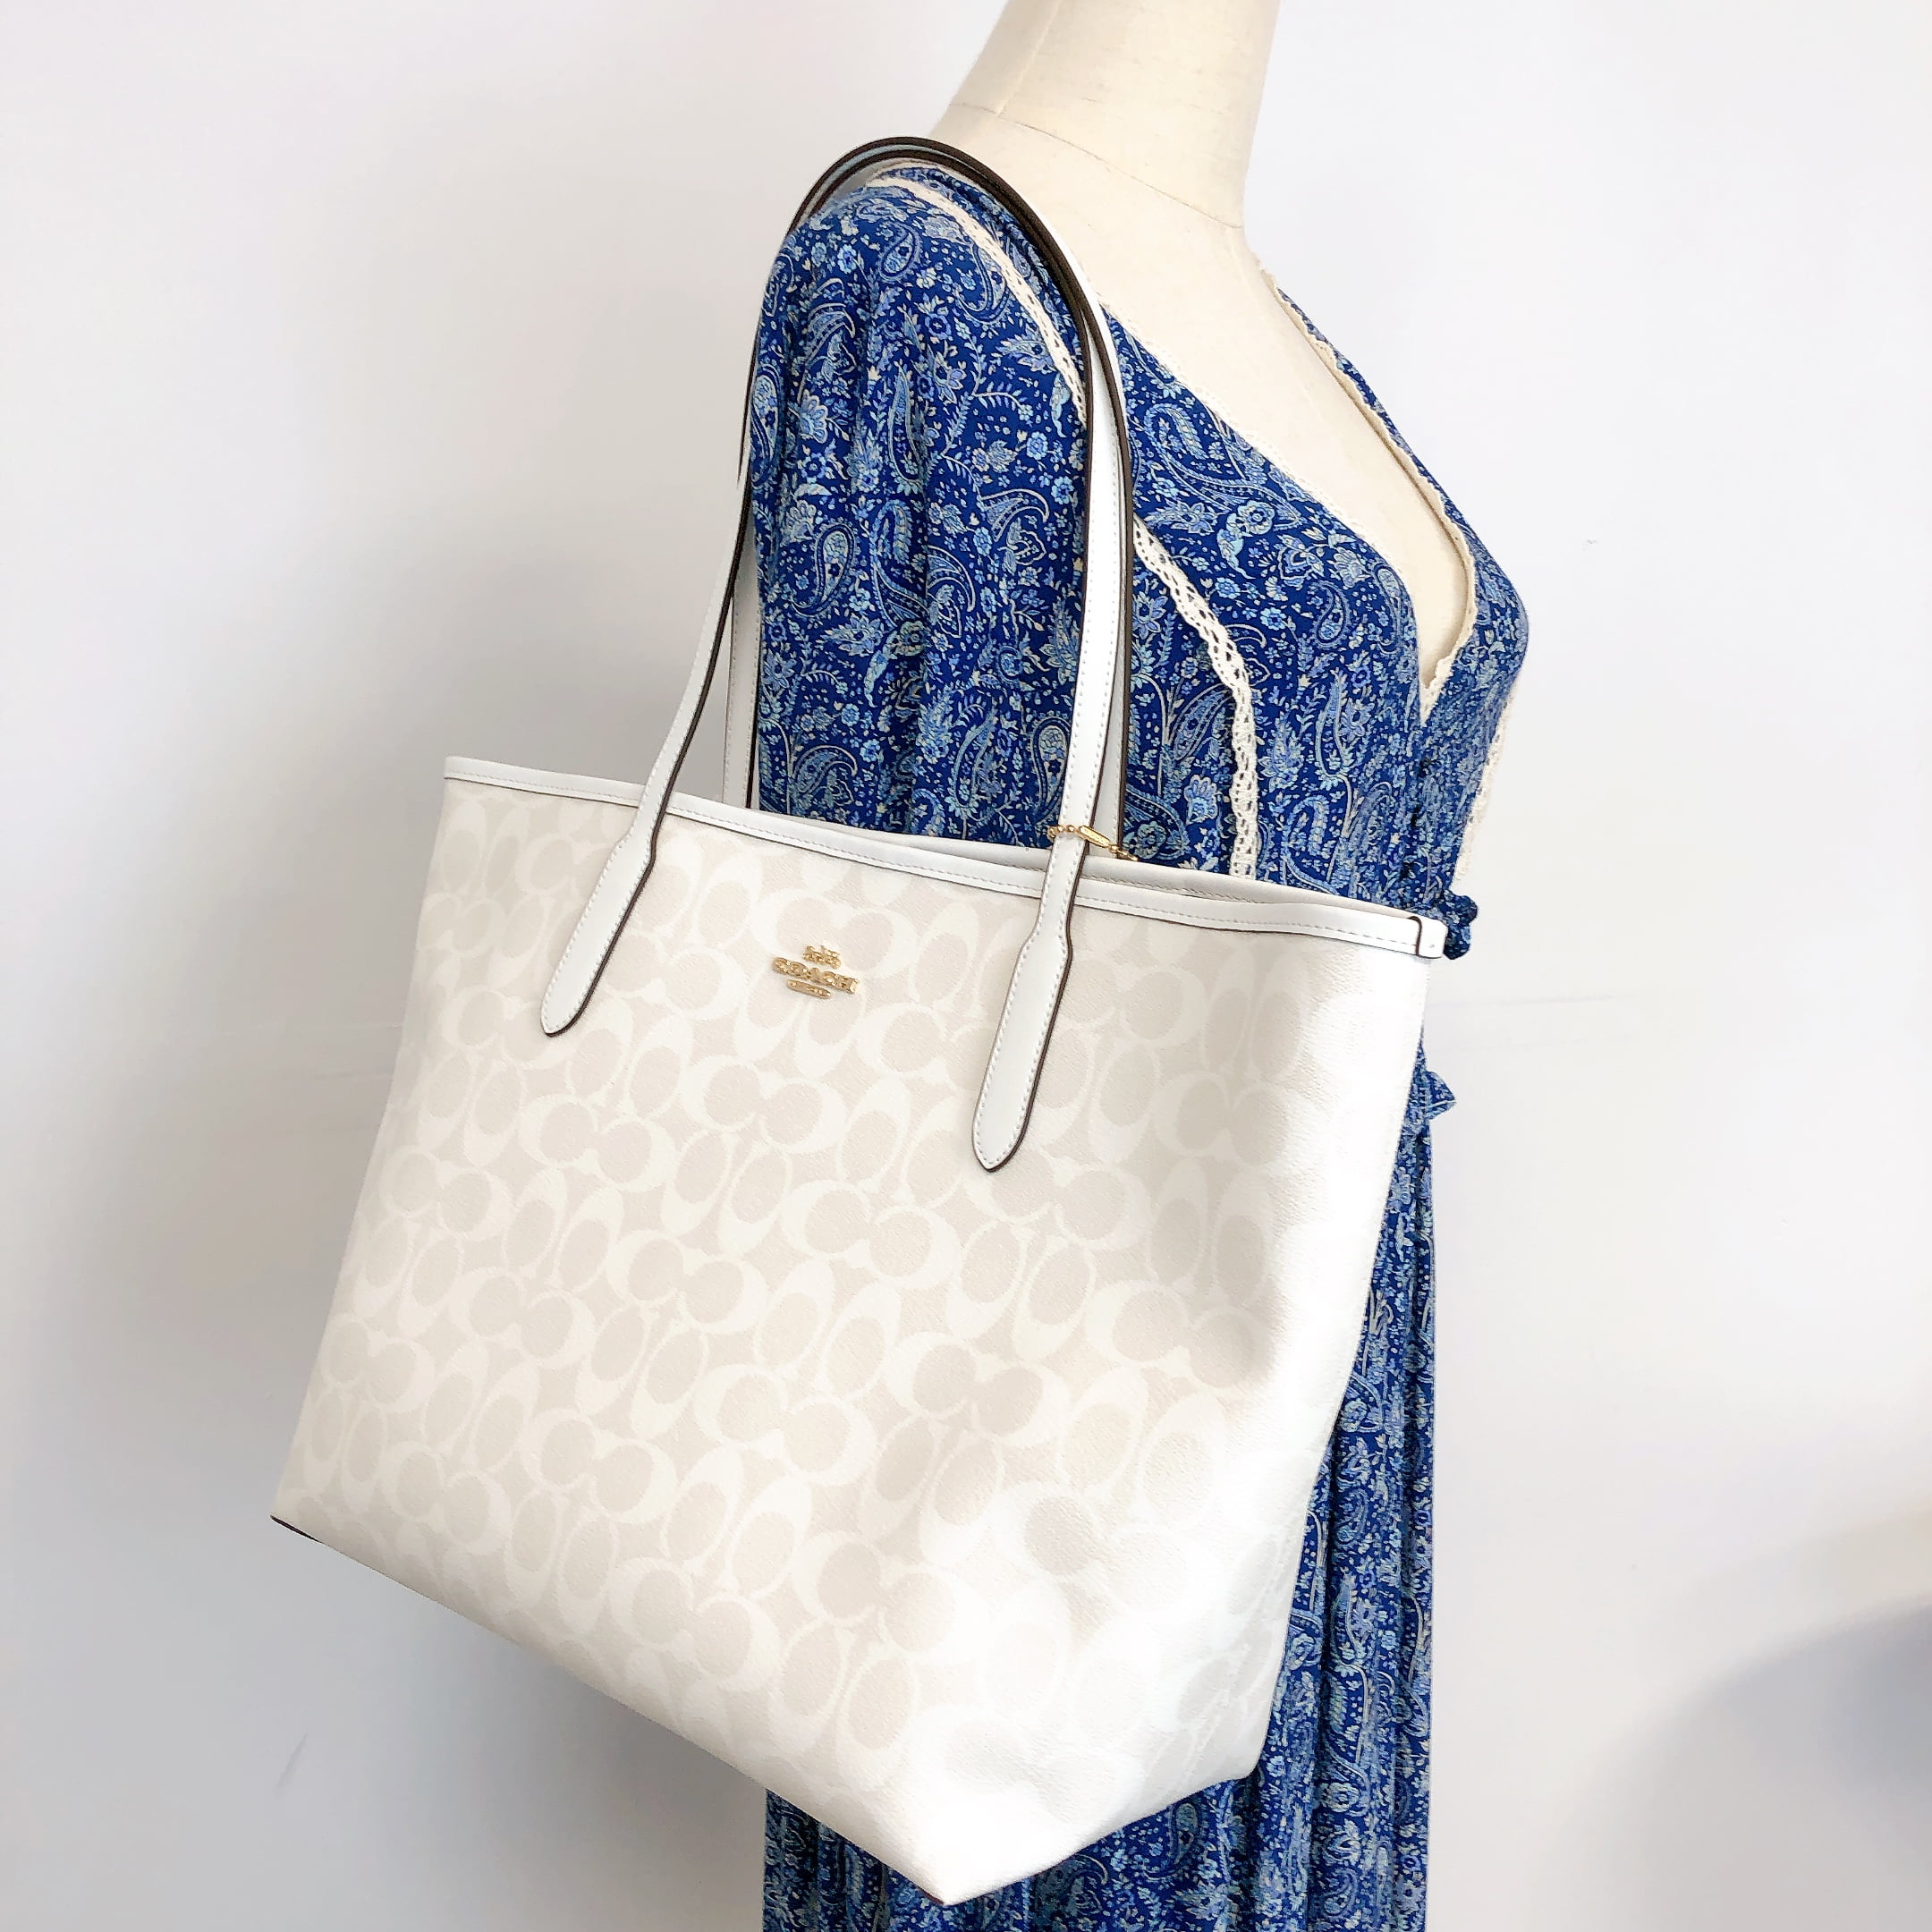 Designer Small Sprayground Shoulder Bag With Long Strap White Fashion Tote  For Women By Name Brand From Tote_bag902, $37.55 | DHgate.Com